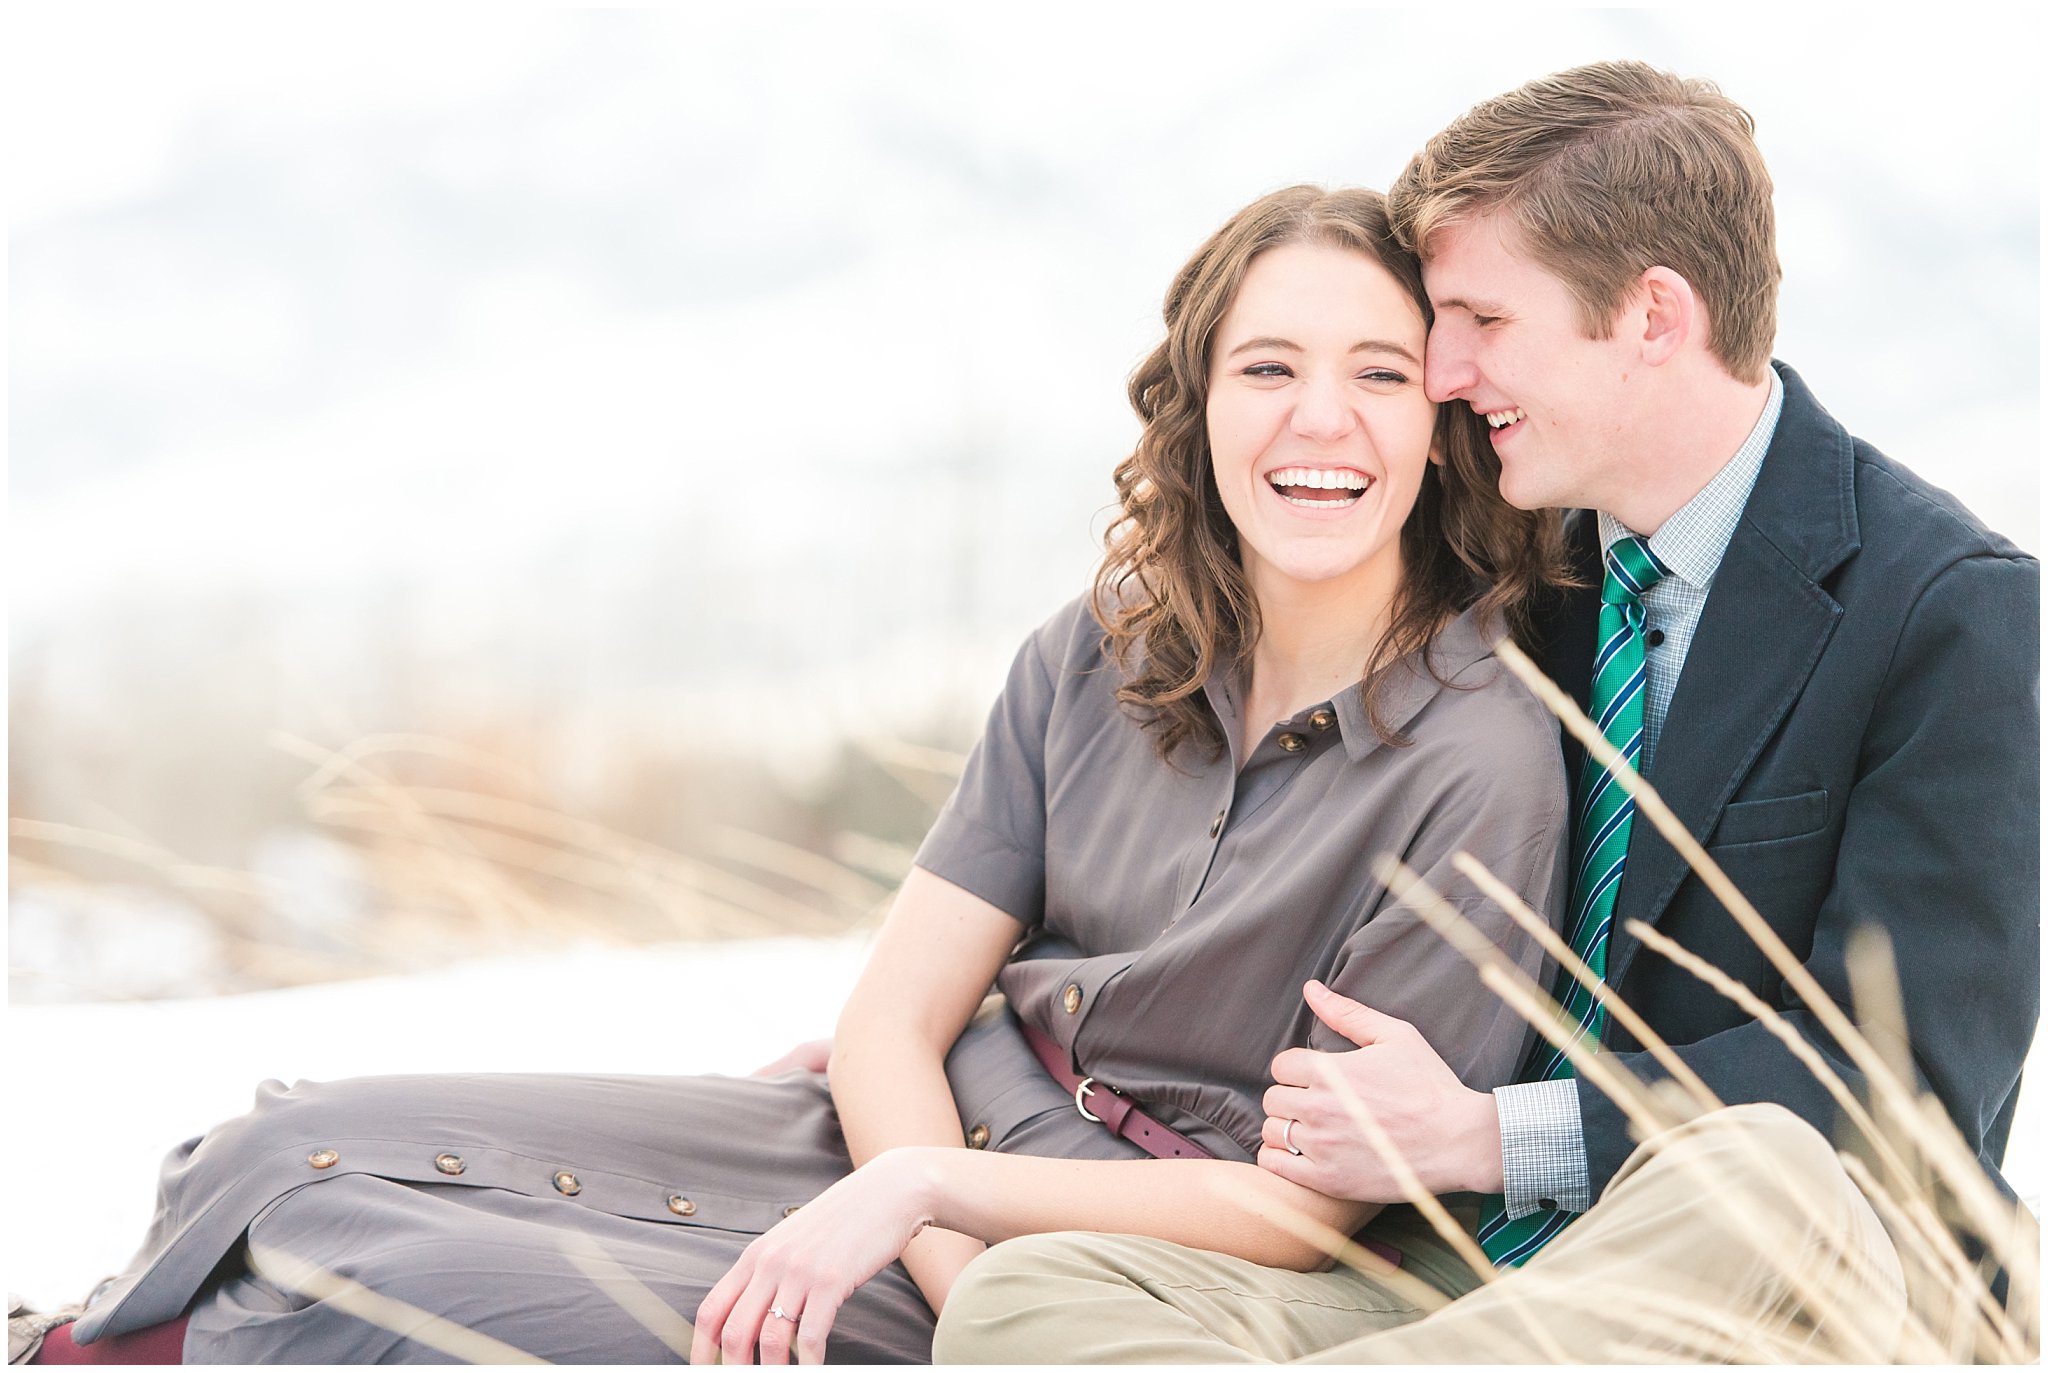 Snowy engagement session with couple dressed up in grey dress and navy sport coat in the mountains | Snowbasin Winter Engagement Session